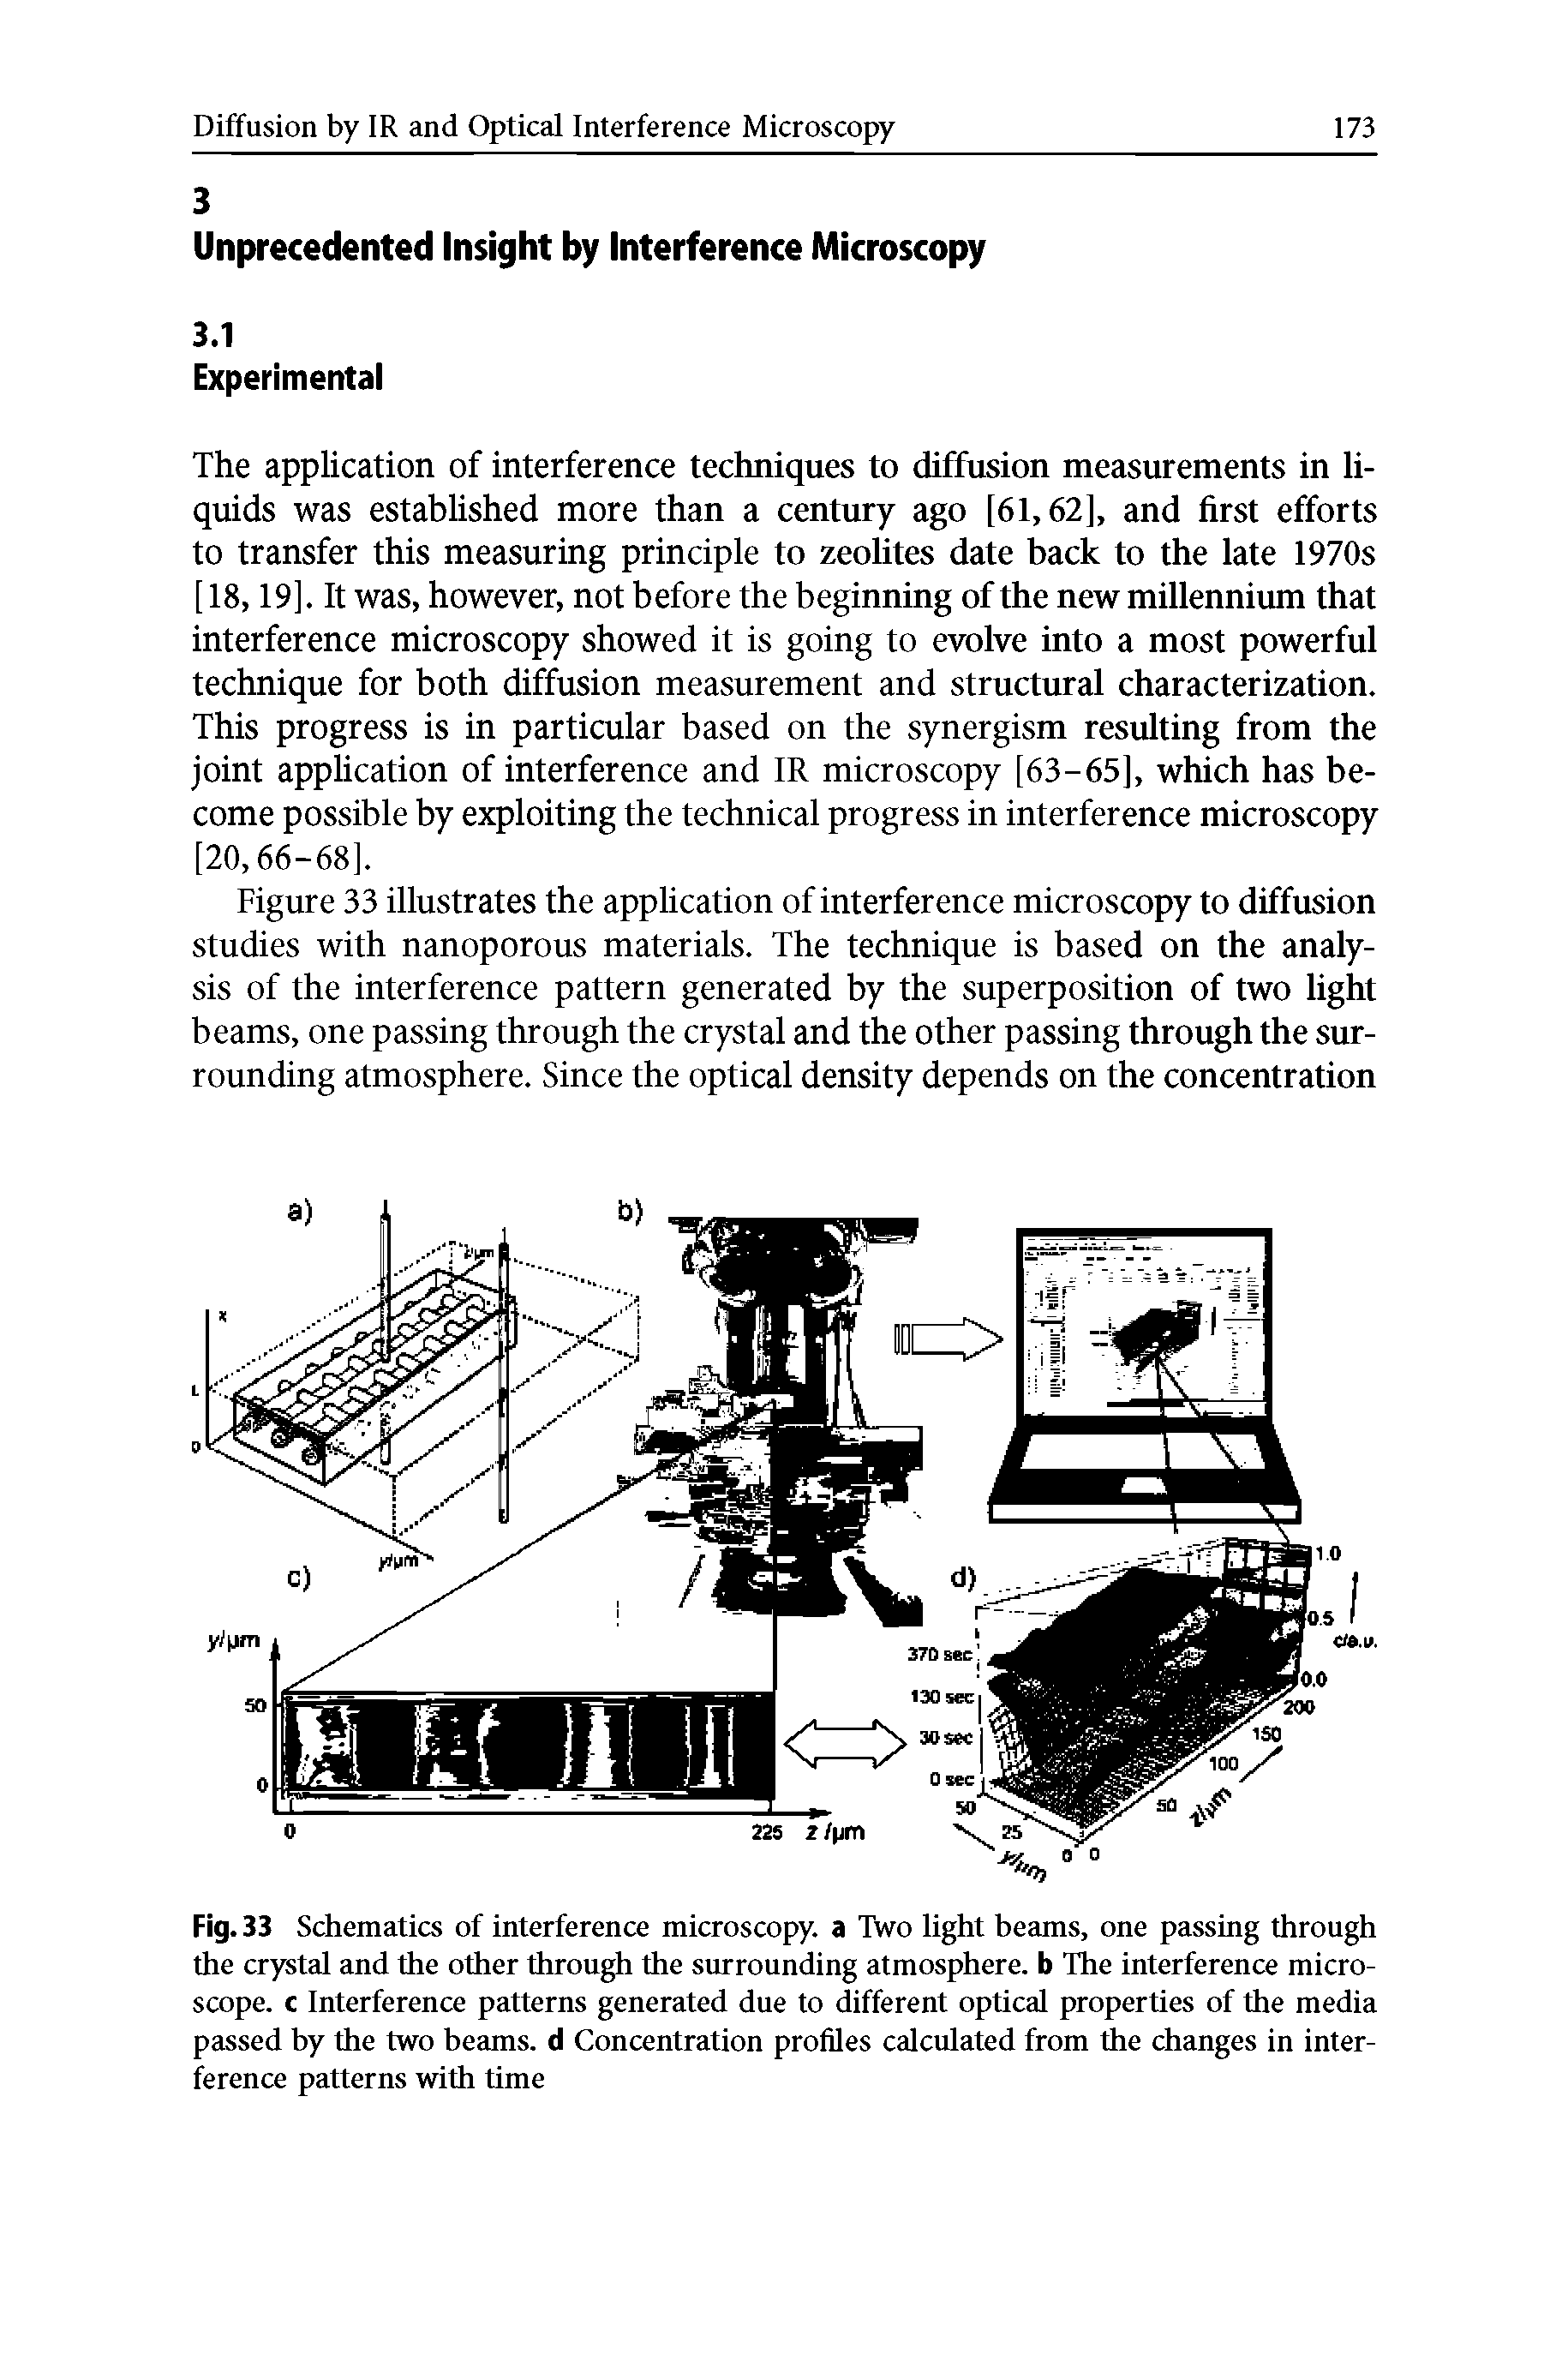 Fig. 33 Schematics of interference microscopy, a Two light beams, one passing through the crystal and the other through the simrounding atmosphere, b The interference microscope. c Interference patterns generated due to different optical properties of the media passed hy the two beams, d Concentration profiles calculated from the changes in interference patterns with time...